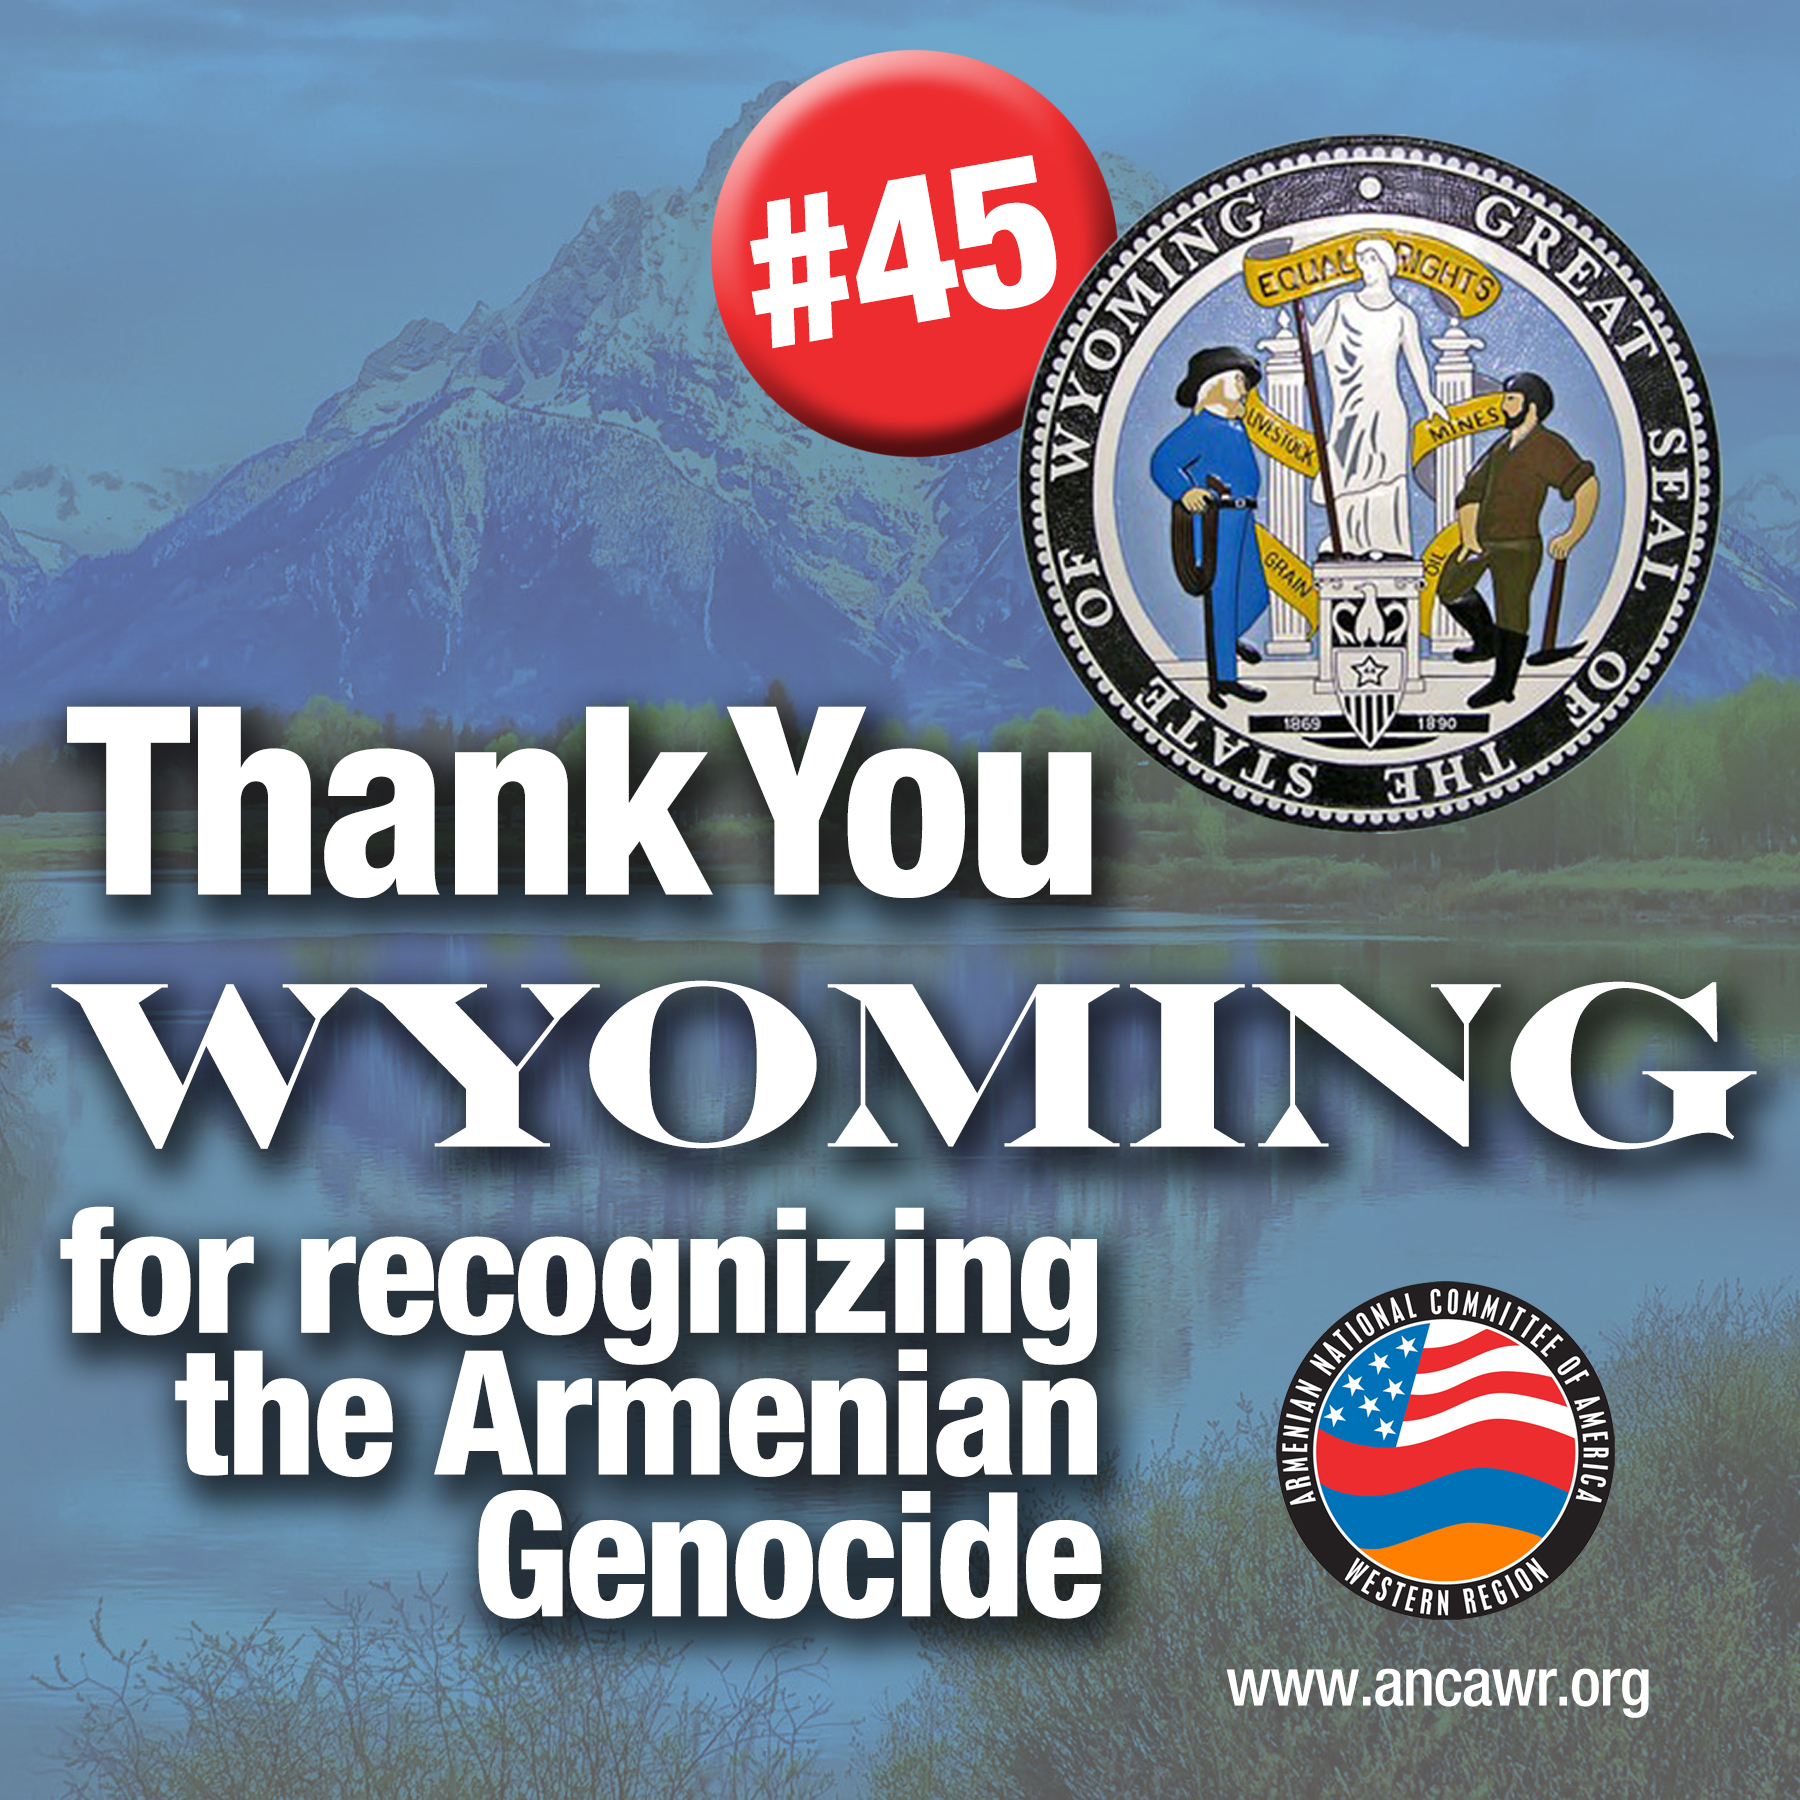 Wyoming Becomes 45th US State to Recognize the Armenian Genocide